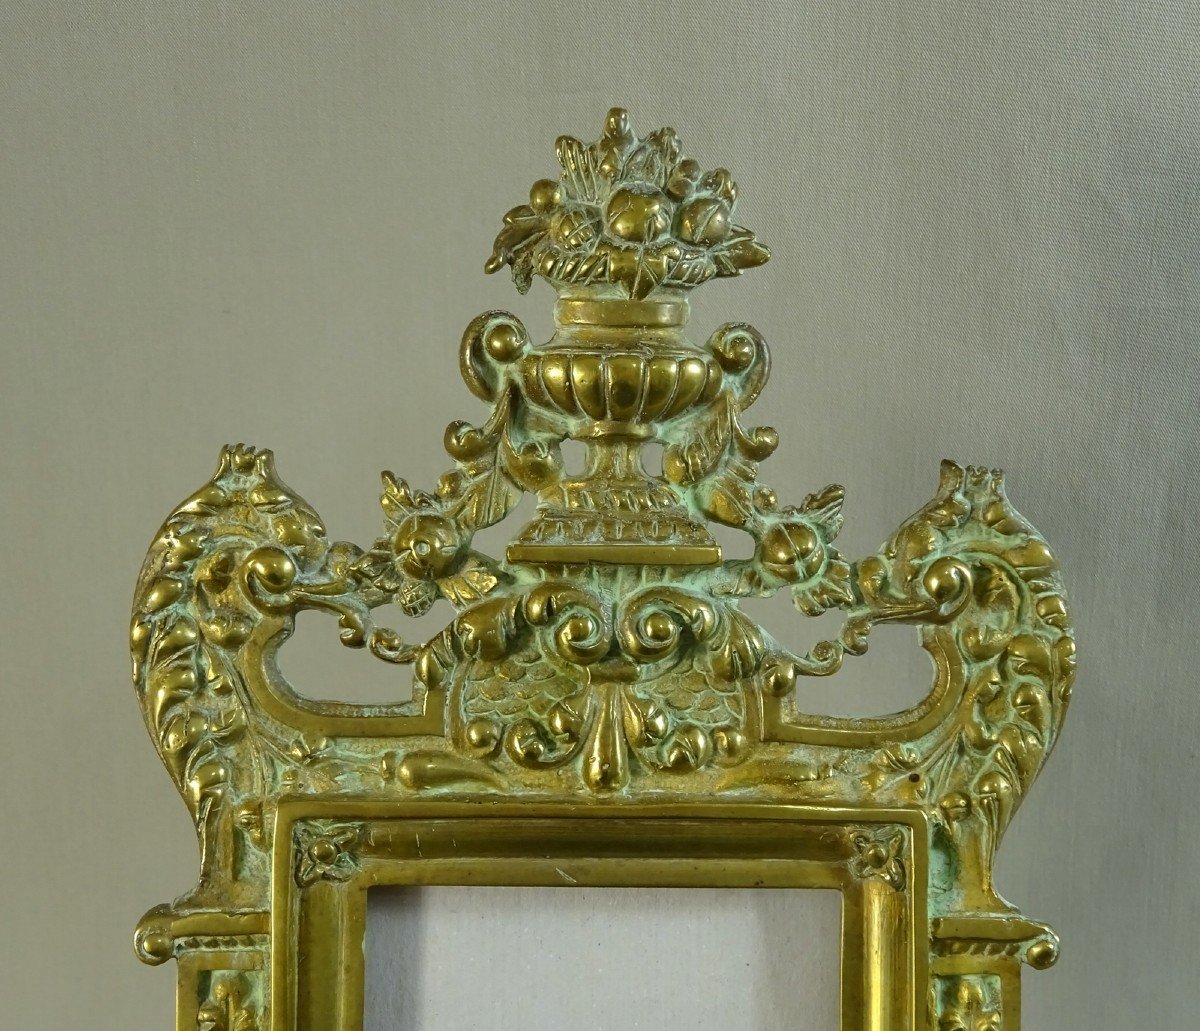 Bronze Frame Or Easel Type Photo Frame With Floral Vase, Chimeras, Scrolls, Volutes Etc. XIXth Century-photo-4